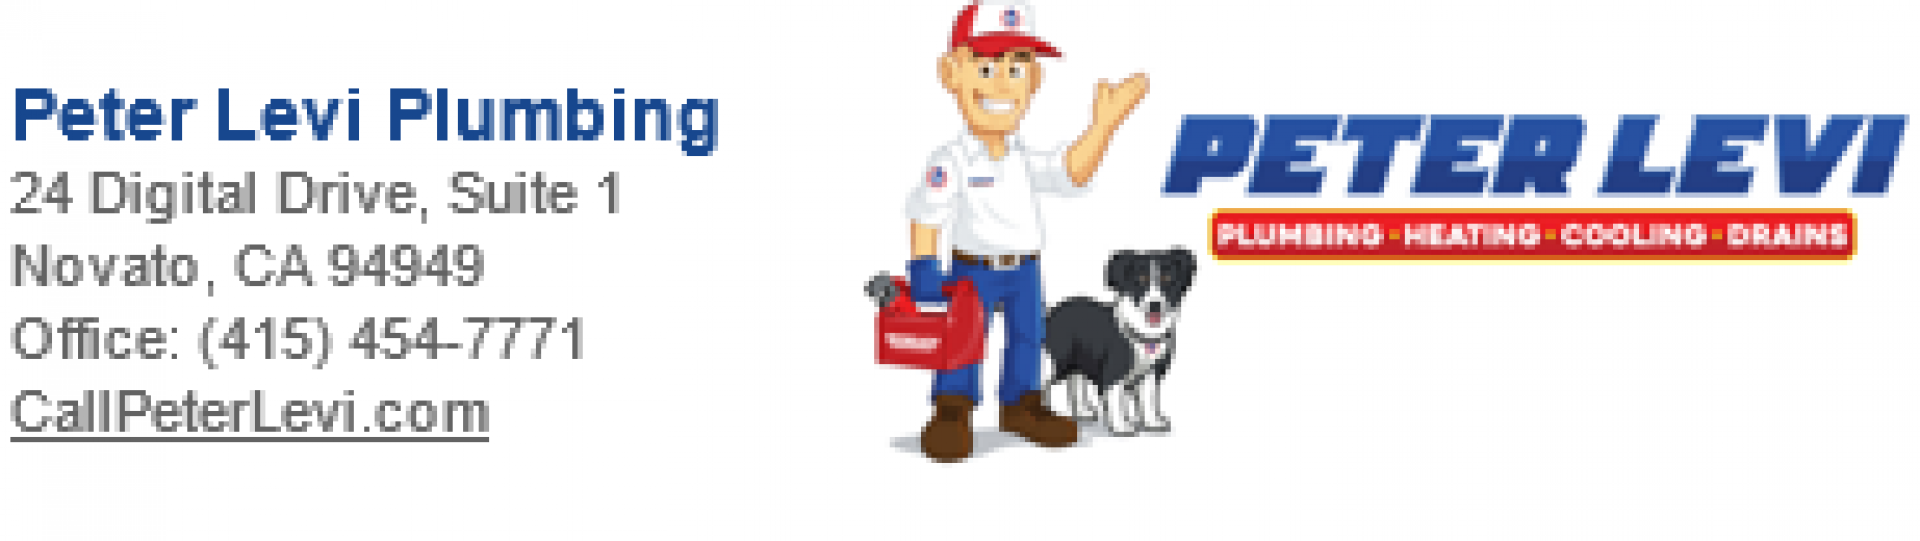 Peter Levi Plumbing, Heating, Cooling And Drains company logo